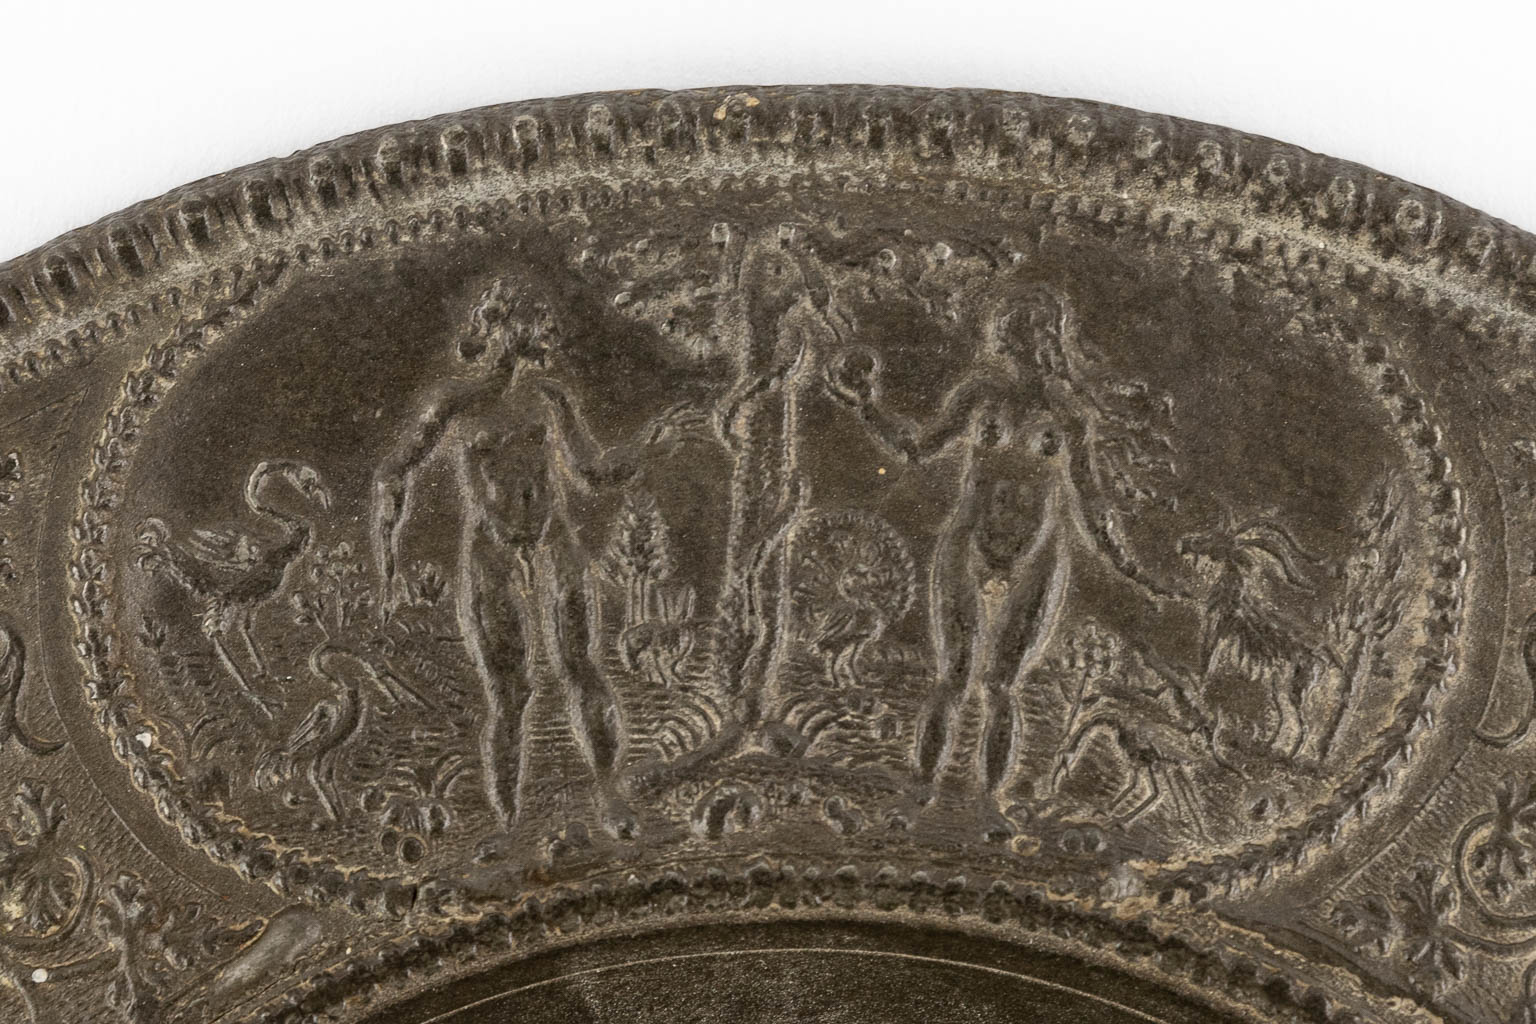 Paulus Oeham de Oude, Nuremberg, Germany. A relief plate, pewter. 17th C. (D:17,8 cm) - Image 5 of 11